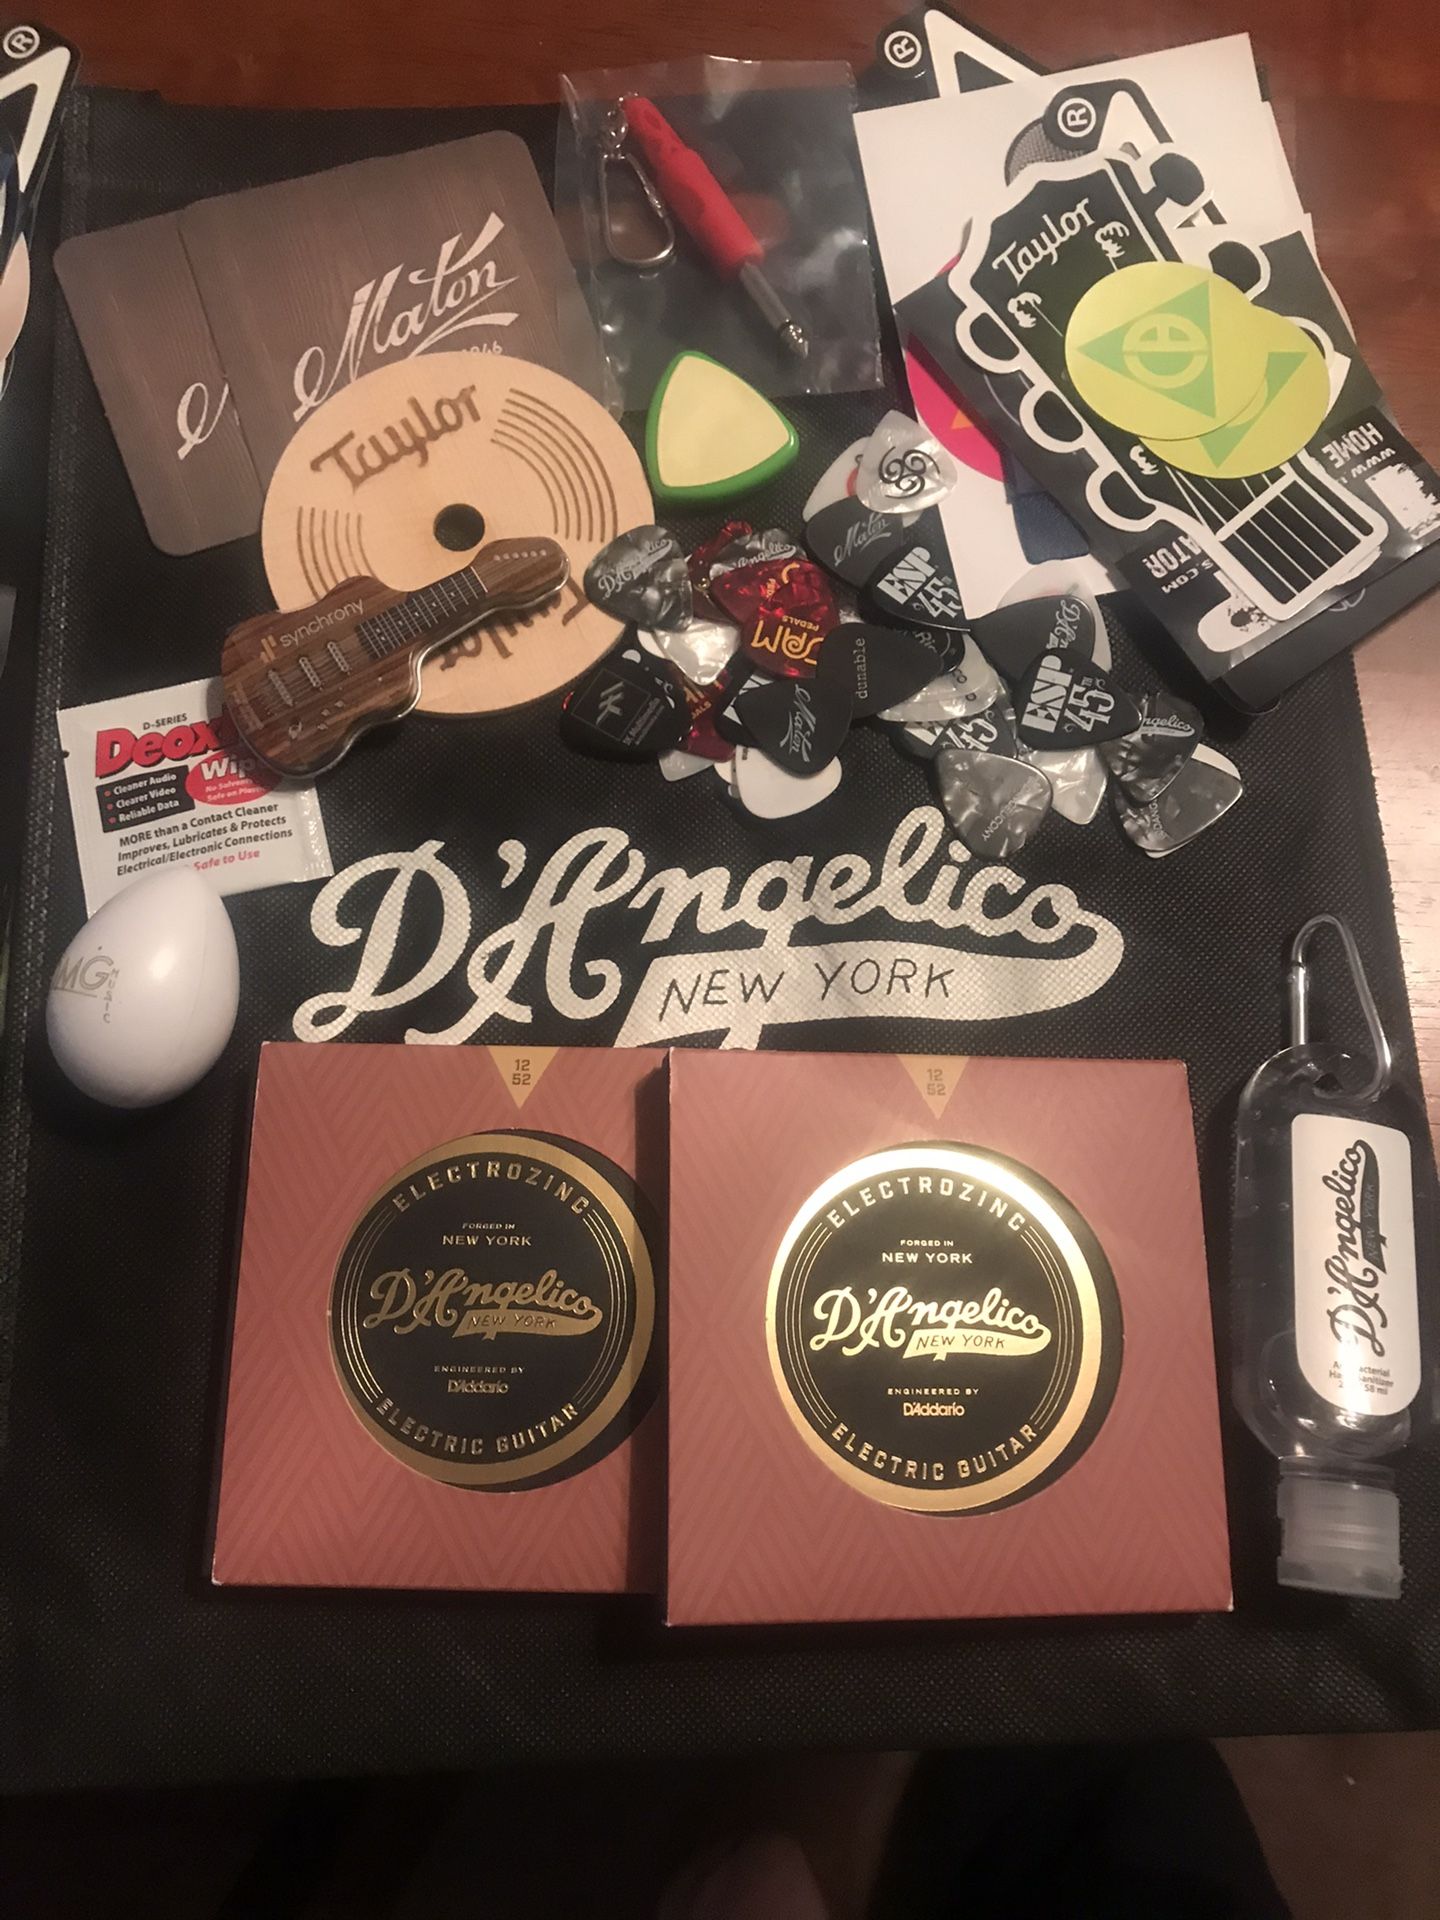 NAMM 2020 D’Angelo guitar’s gift bag with a lot of goodies